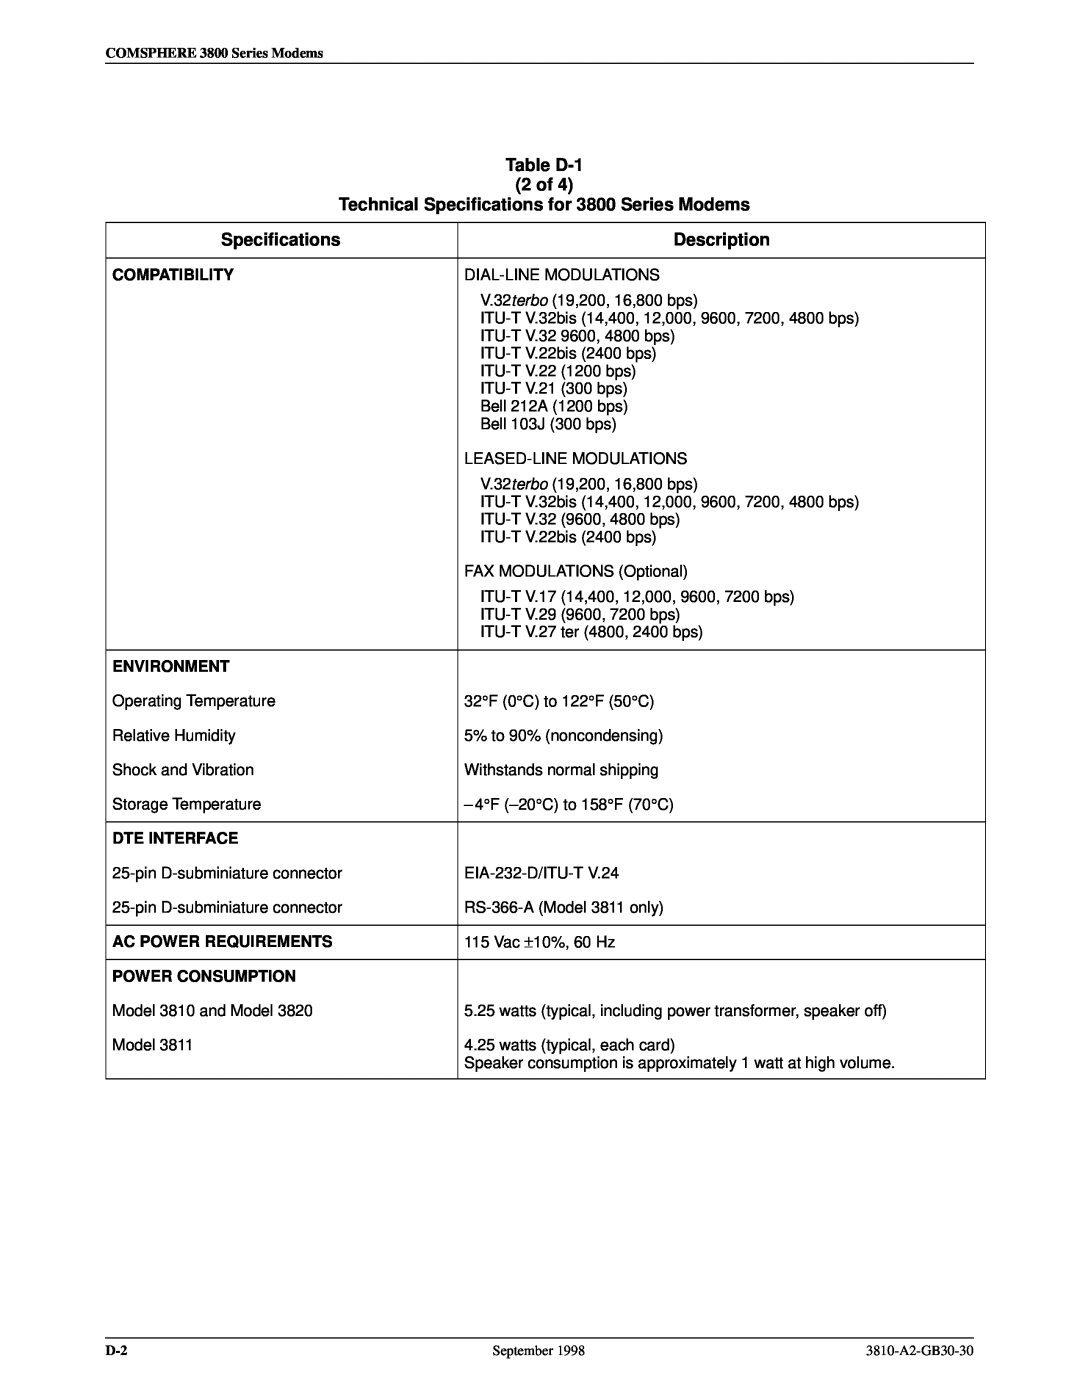 Paradyne manual Table D-1 2 of Technical Specifications for 3800 Series Modems, Description, Compatibility, Environment 